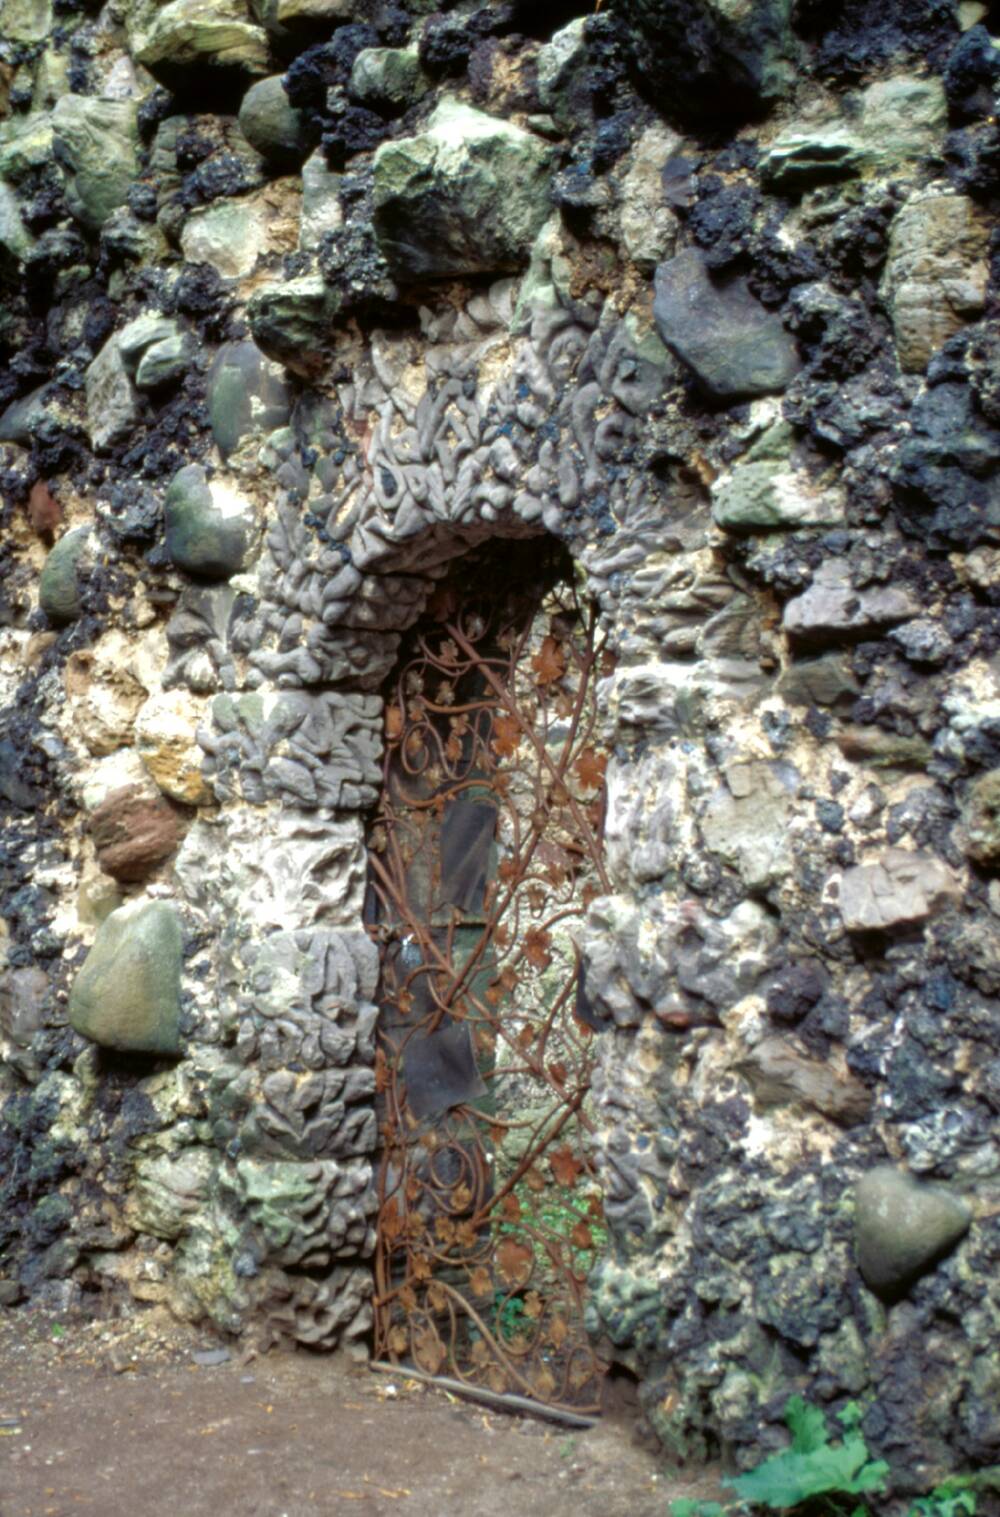 A close-up of the stone doorway to a stone grotto, with many stones and shells stuck to the walls. The gate is made of delicate metal, with leaf carvings throughout.